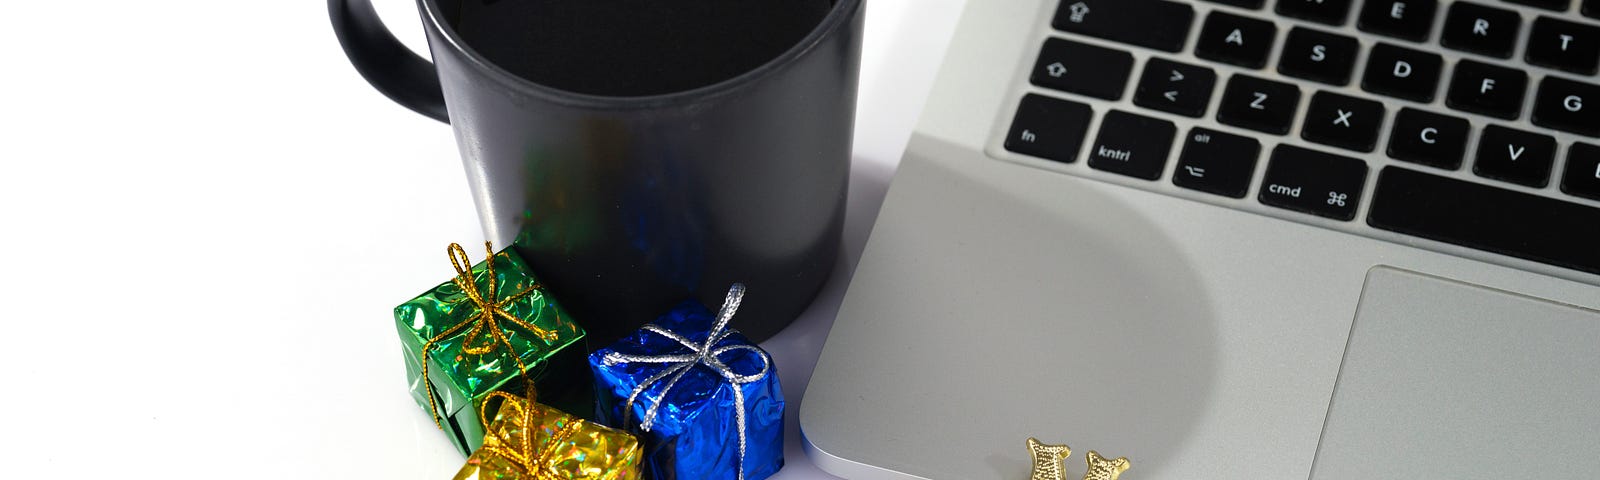 A laptop, a cup, and some tiny presents with the words ‘Merry Christmas’